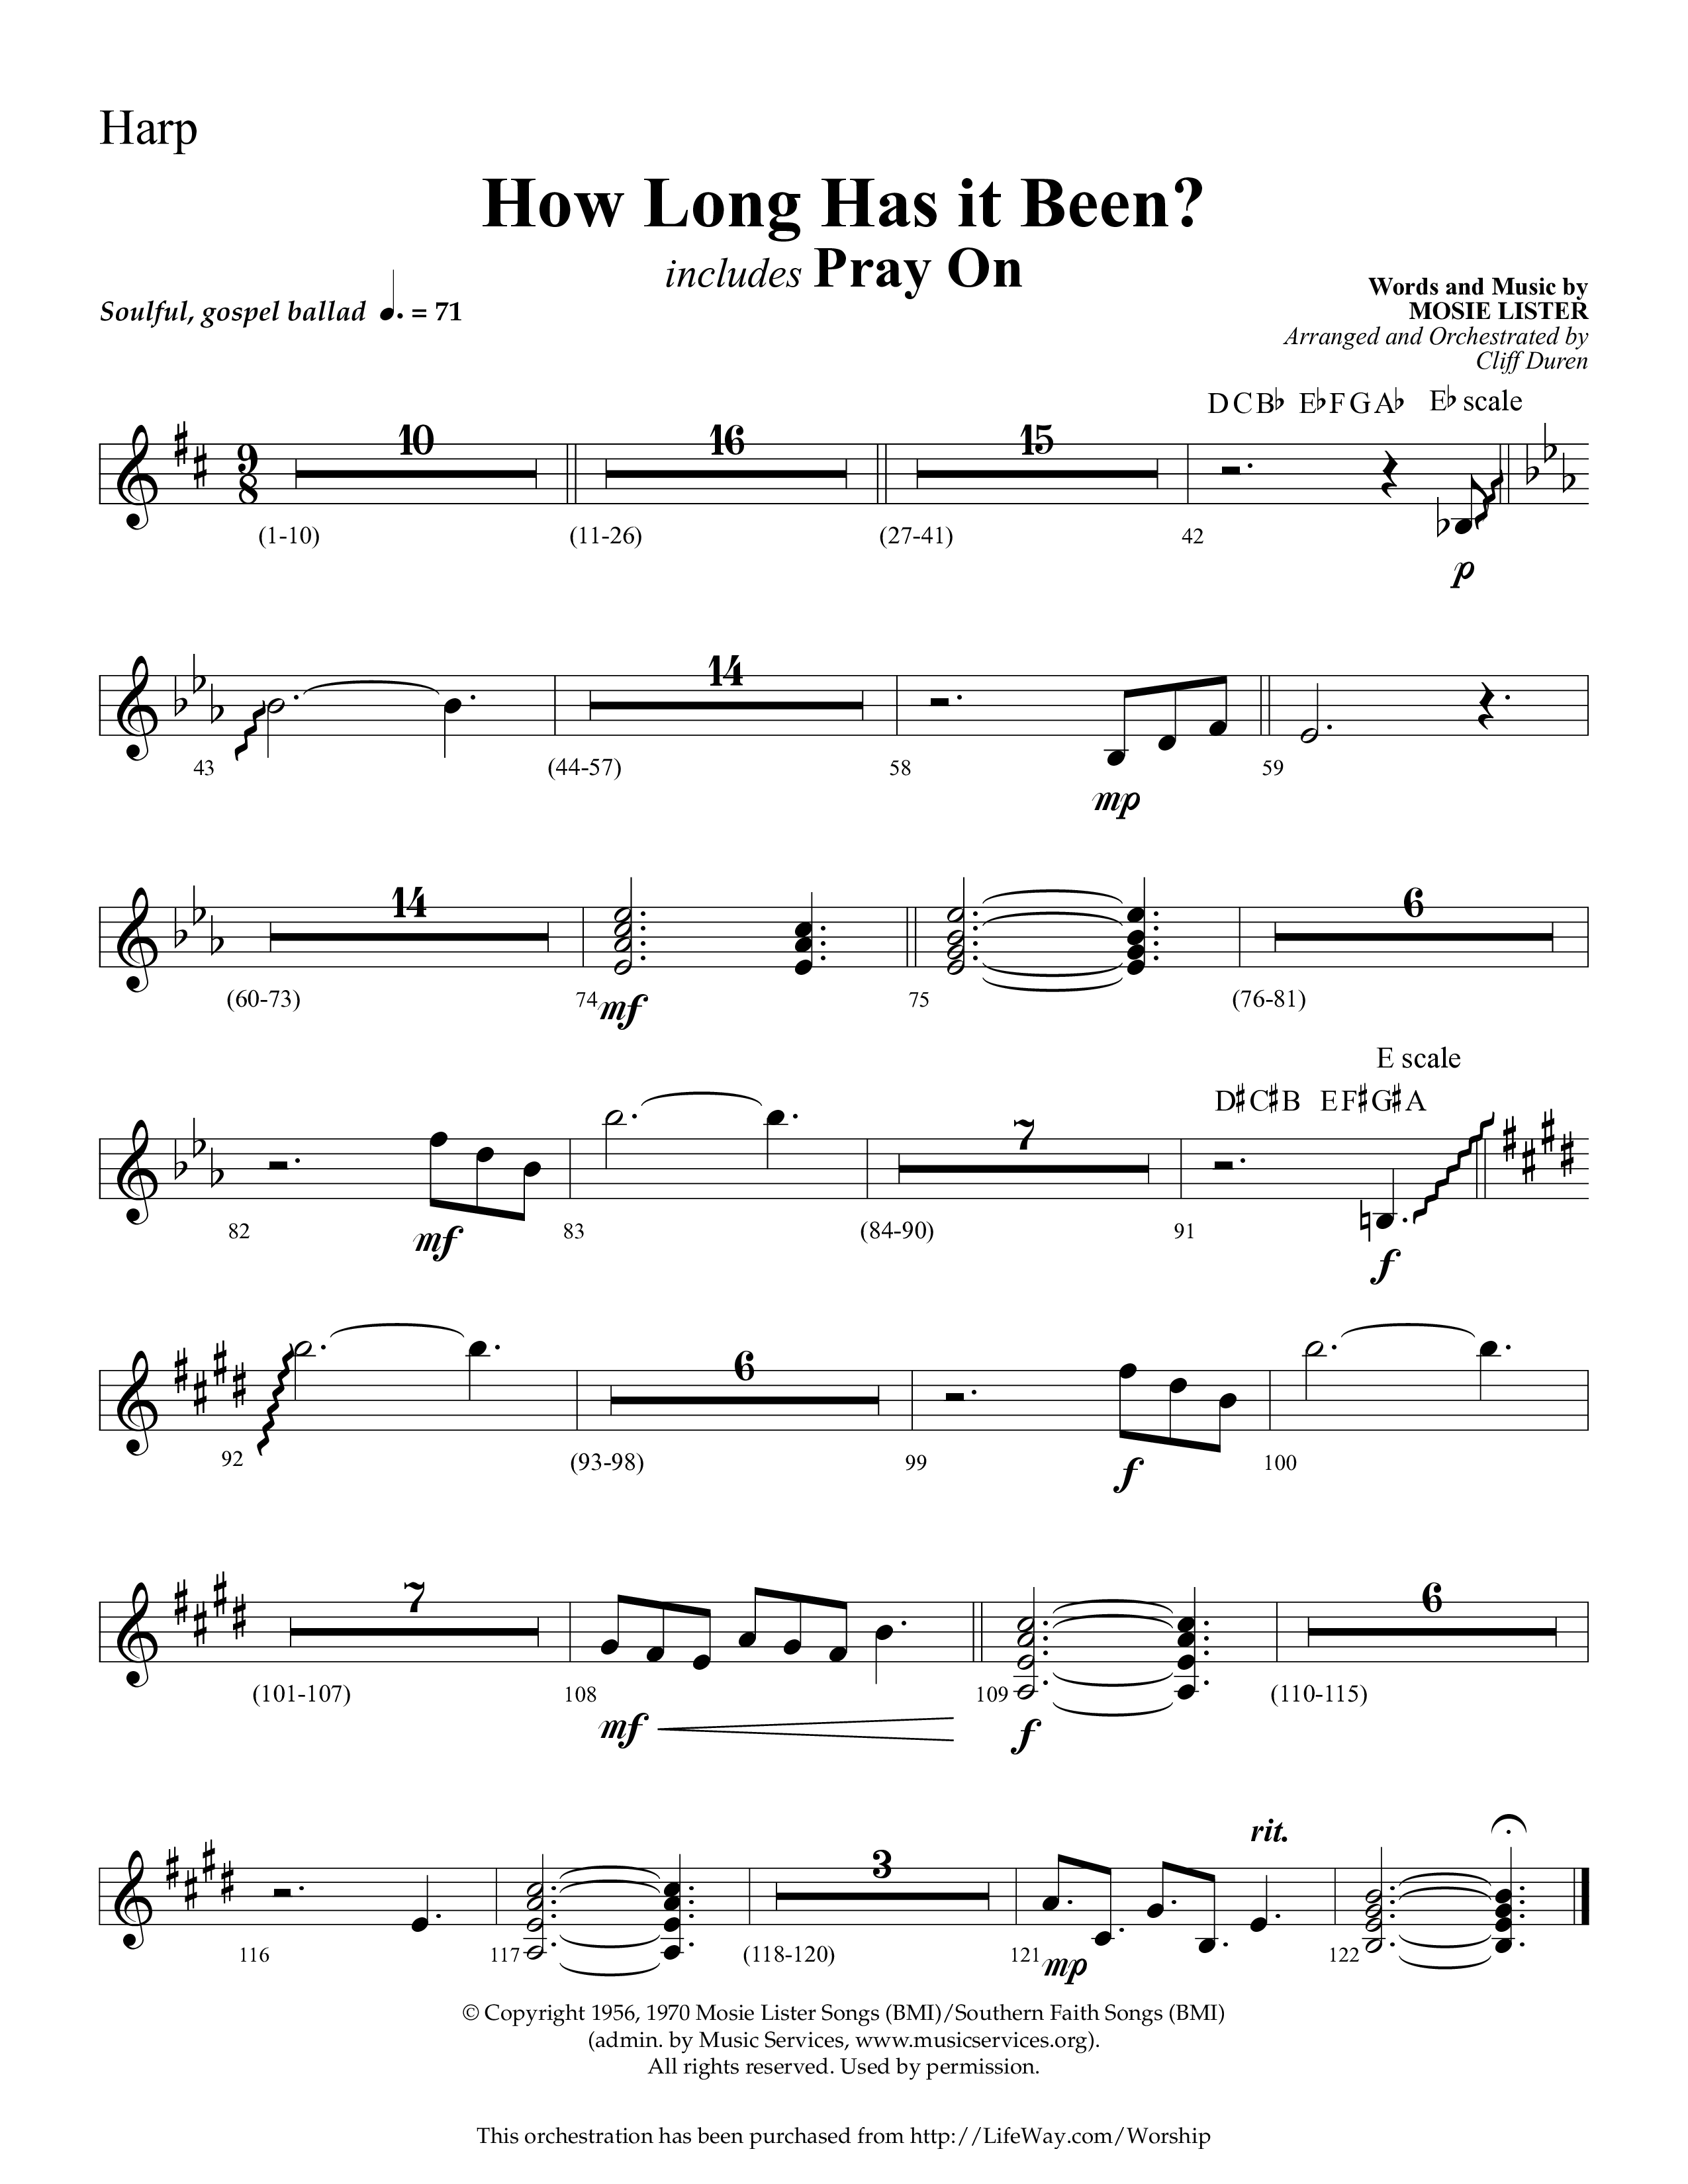 How Long Has It Been (with Pray On) (Choral Anthem SATB) Harp (Lifeway Choral / Arr. Cliff Duren)